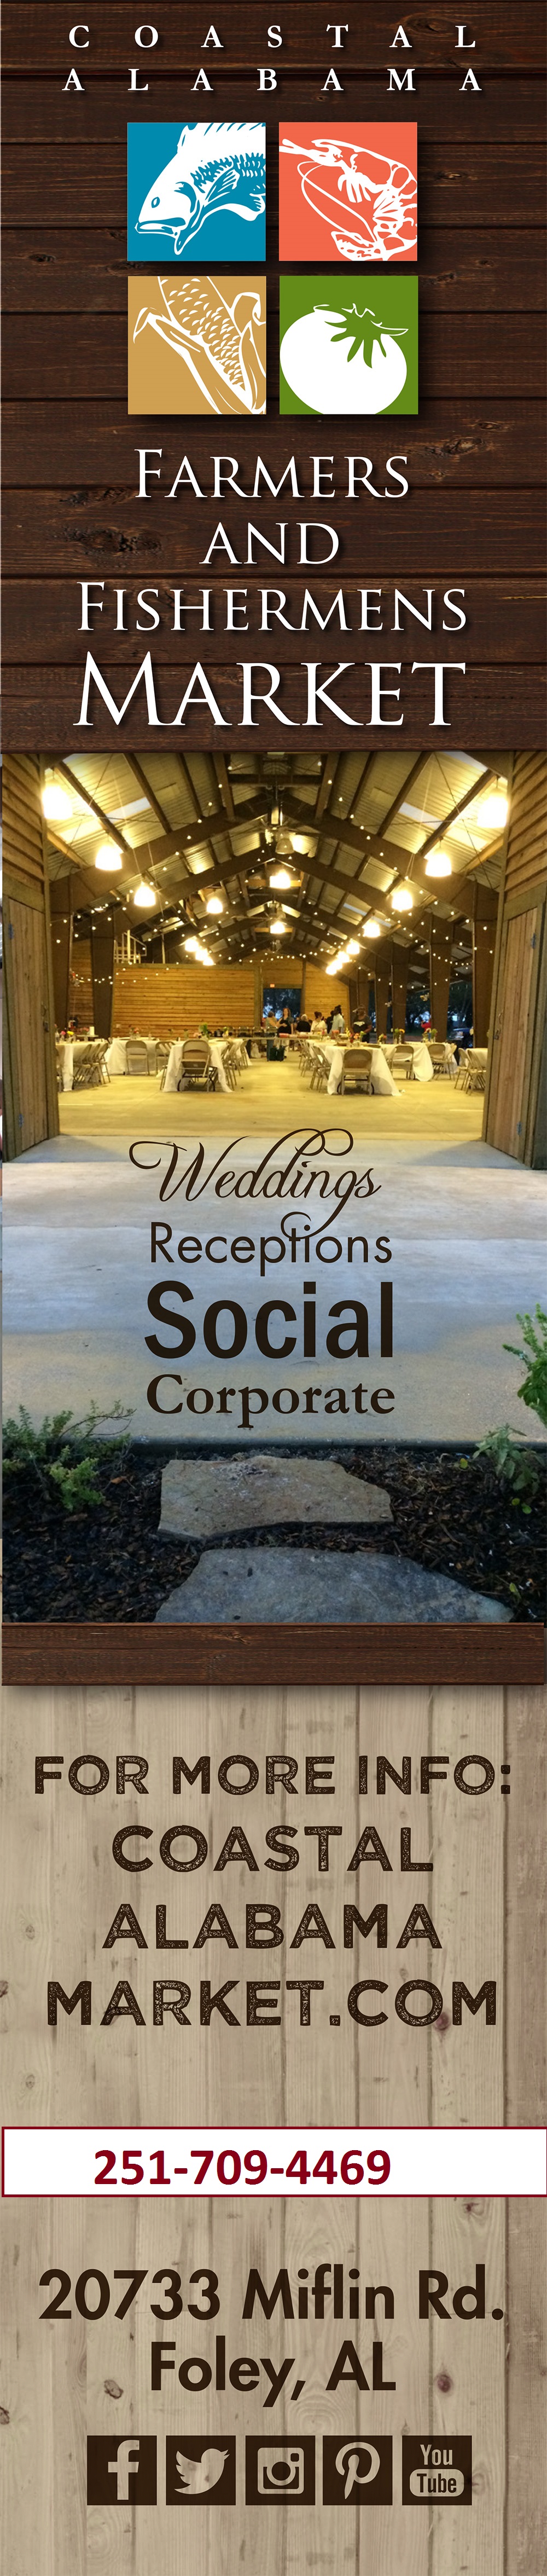 Rental Facilities for Weddings, Receptions, Social Gatherings and Corporate Events